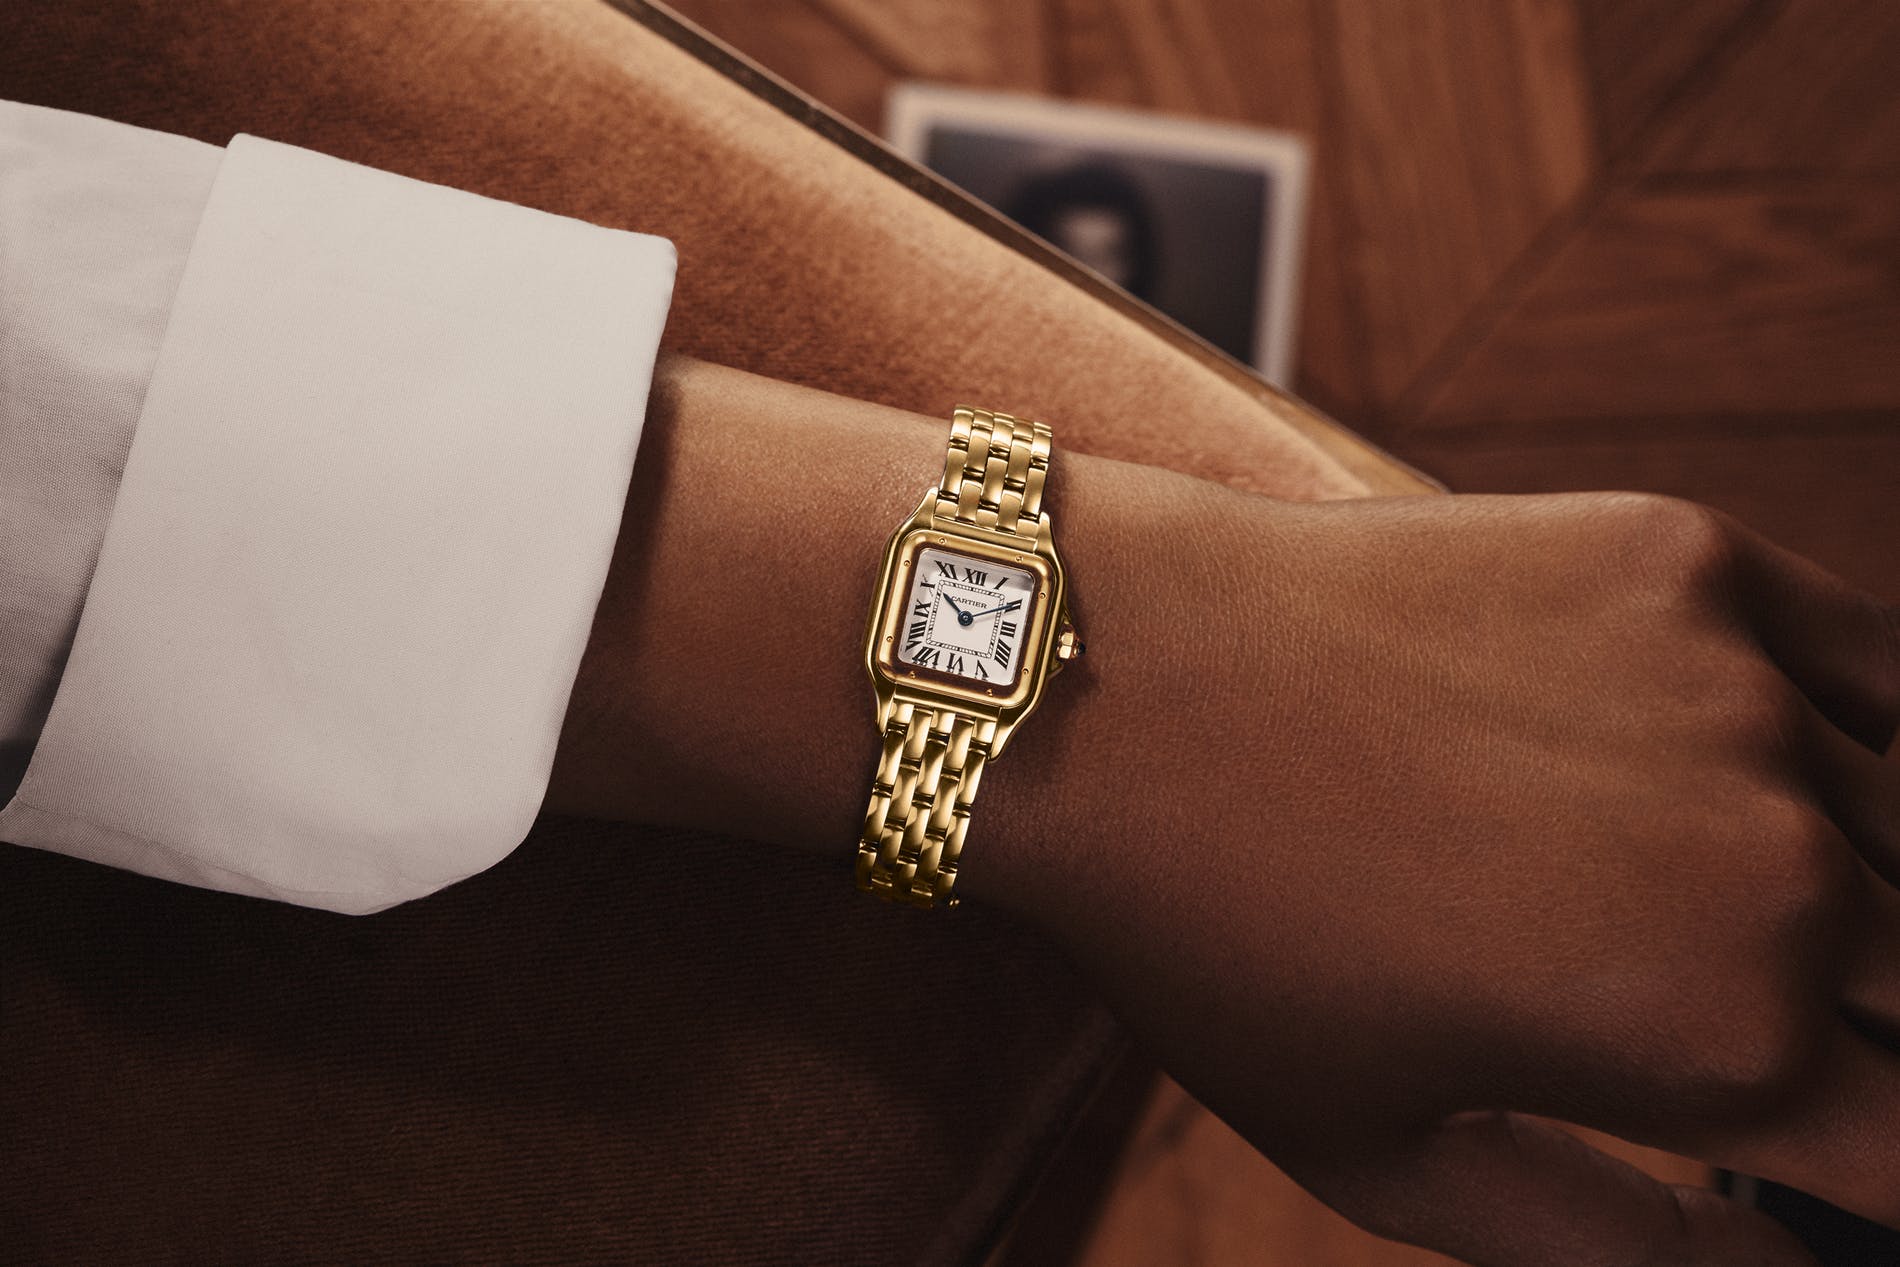 tew cartier panthere watch